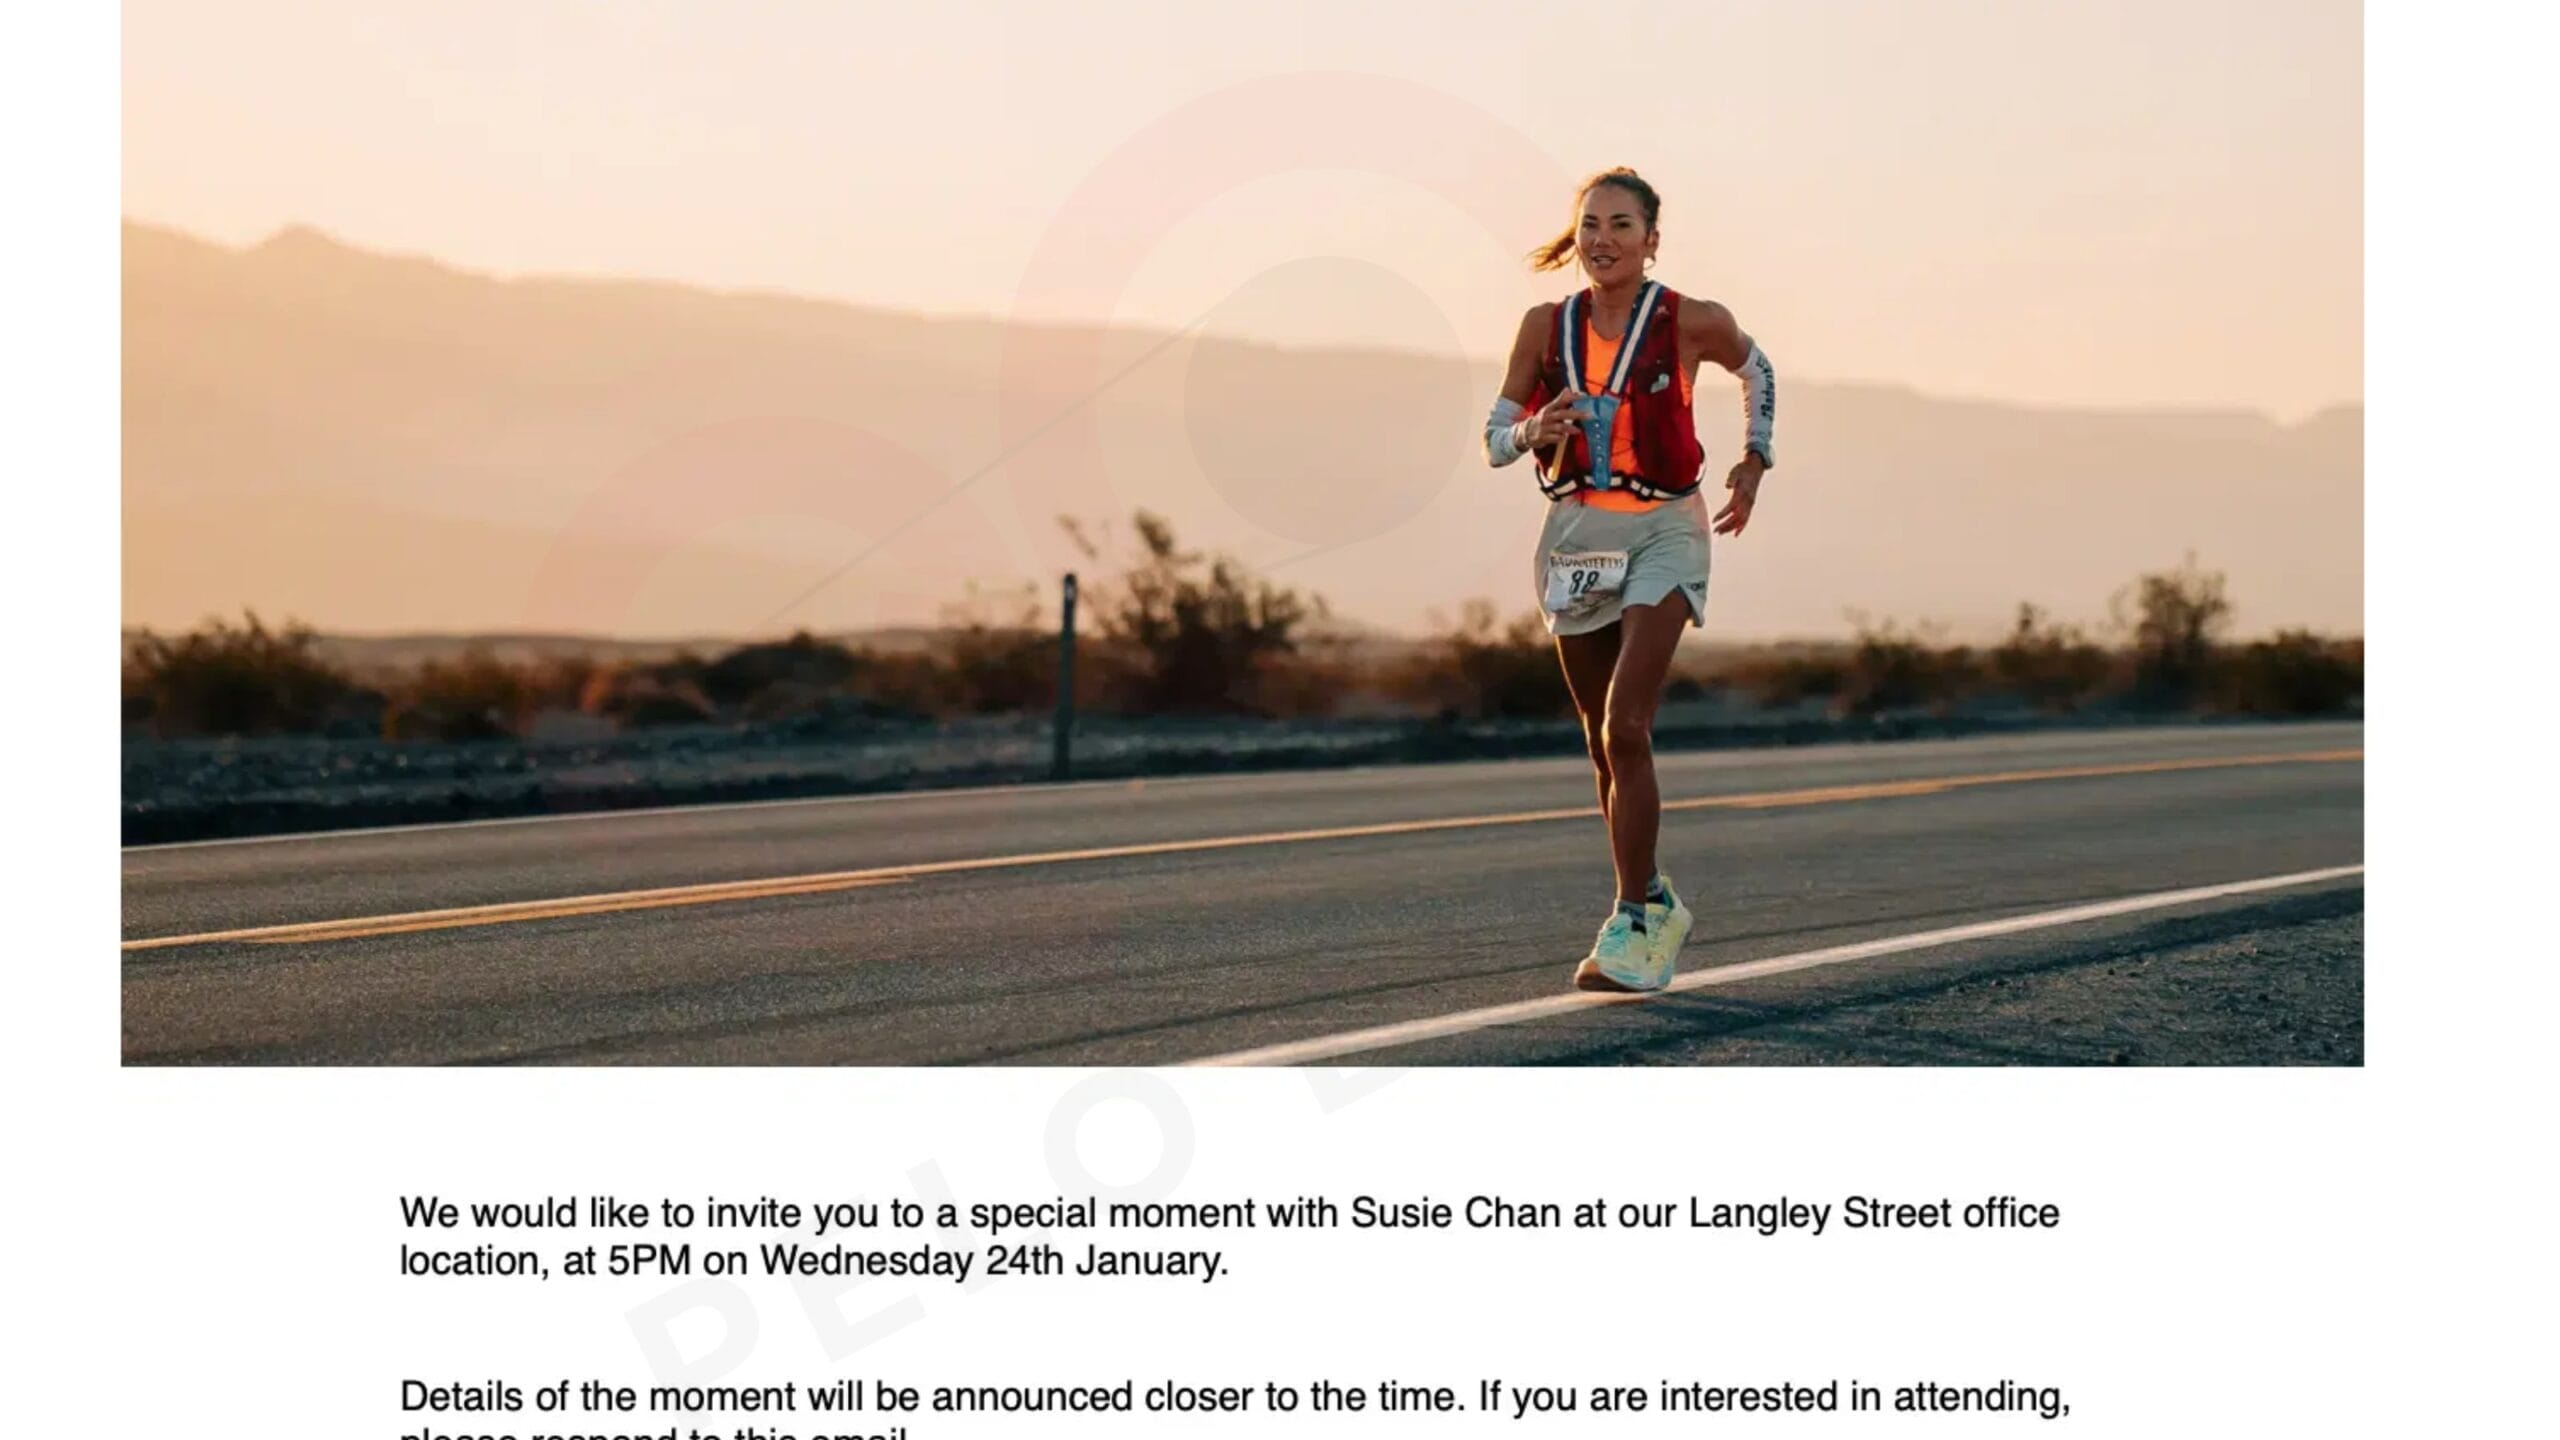 Peloton email inviting members to A Special Moment with Susie Chan.